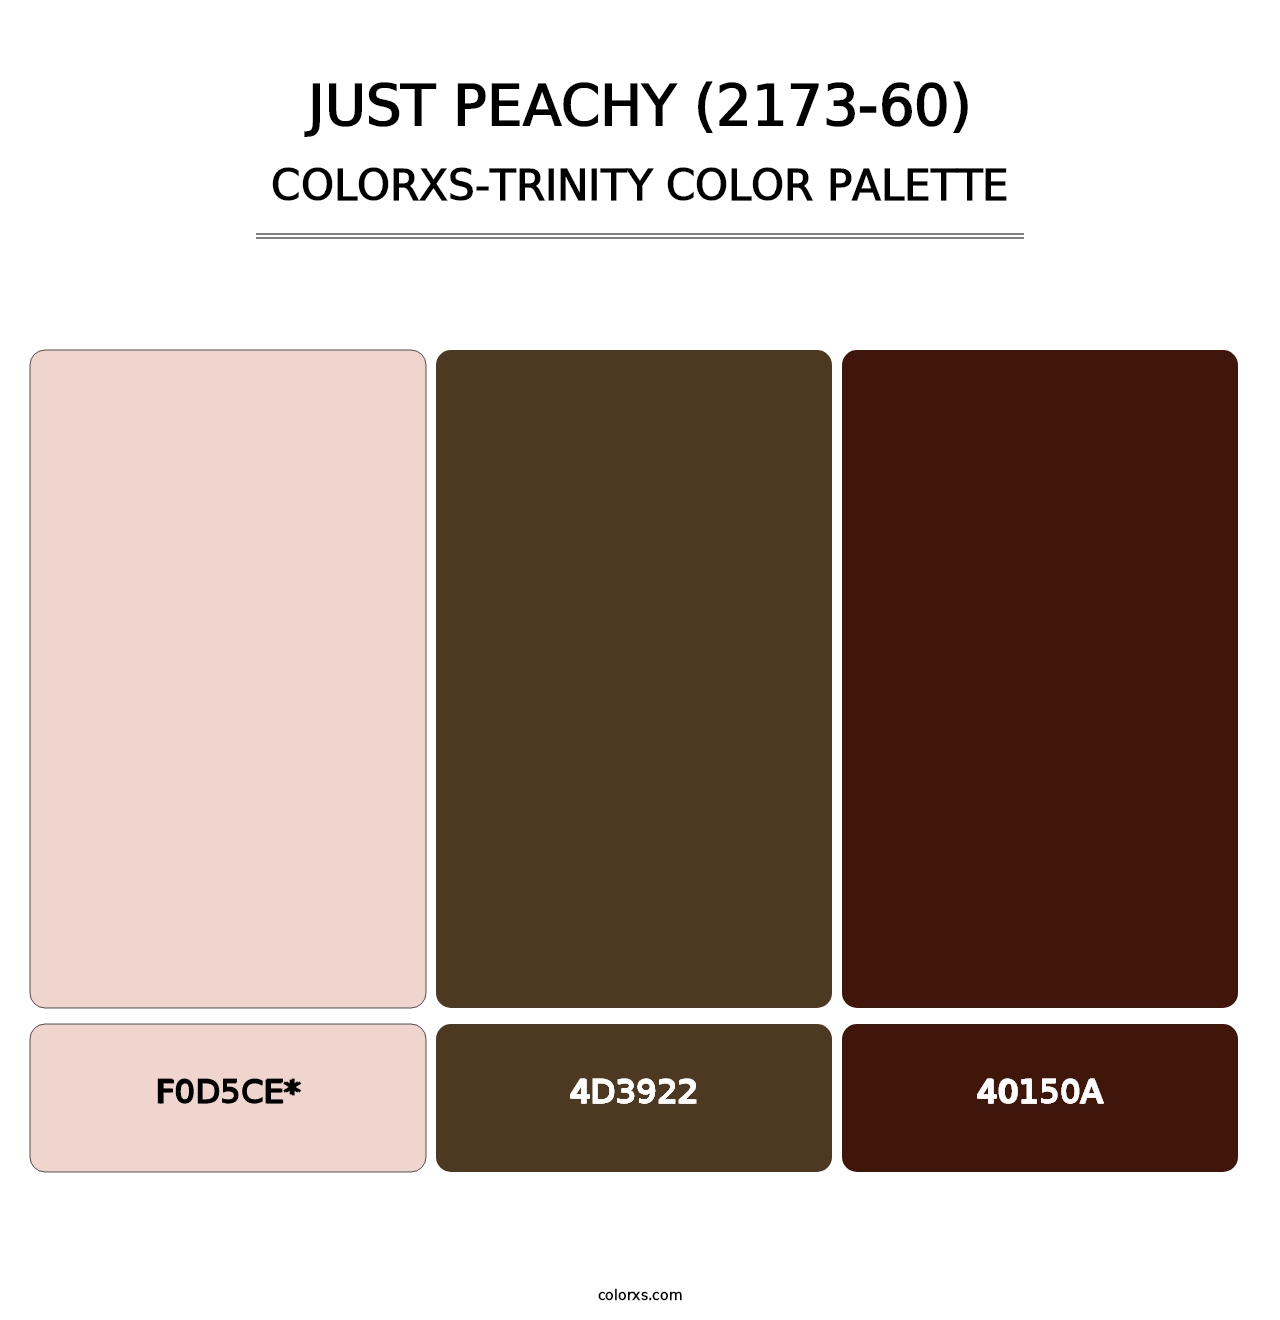 Just Peachy (2173-60) - Colorxs Trinity Palette